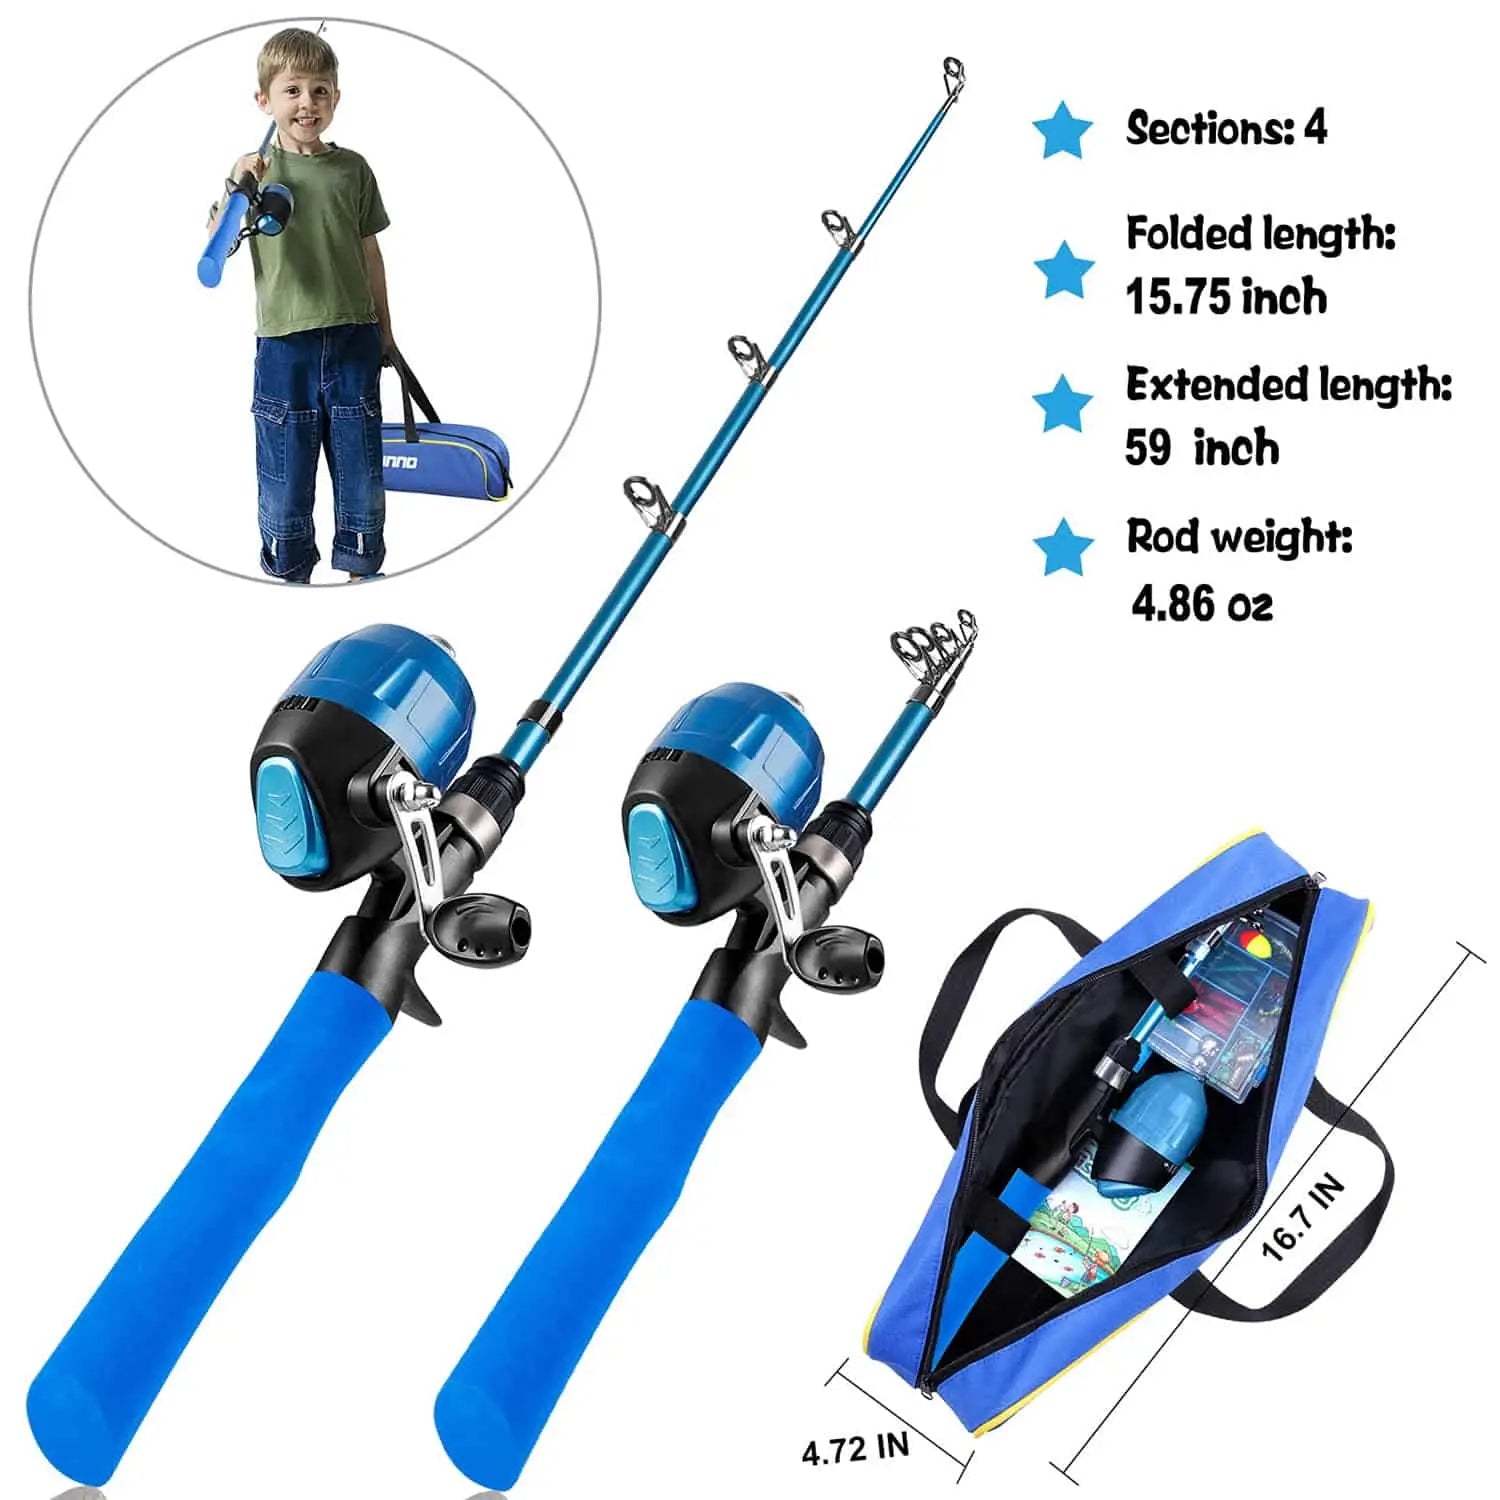 PLUSINNO Kids Fishing Pole and Reel Combo Kit with Tackle Box - Portable  Telescopic Rod, Spincast Reel, and Accessories for Boys, Girls, Youth